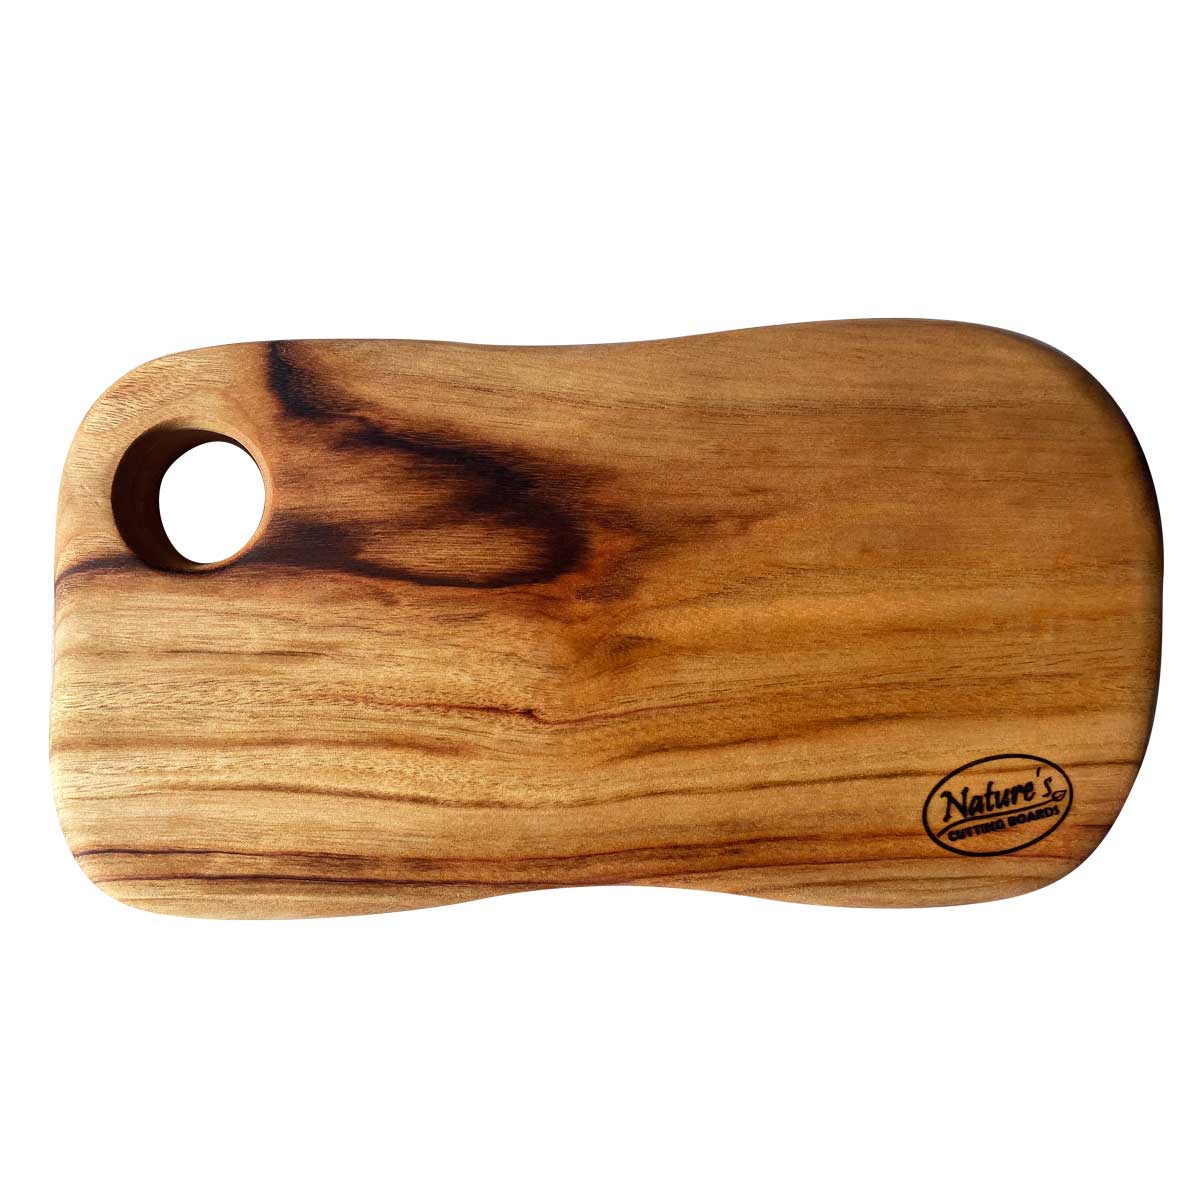 A small freeform wood chopping board, with a hole drilled through it for carrying and hanging, made from camphor laurel timber and handmade by Nature's Boards.